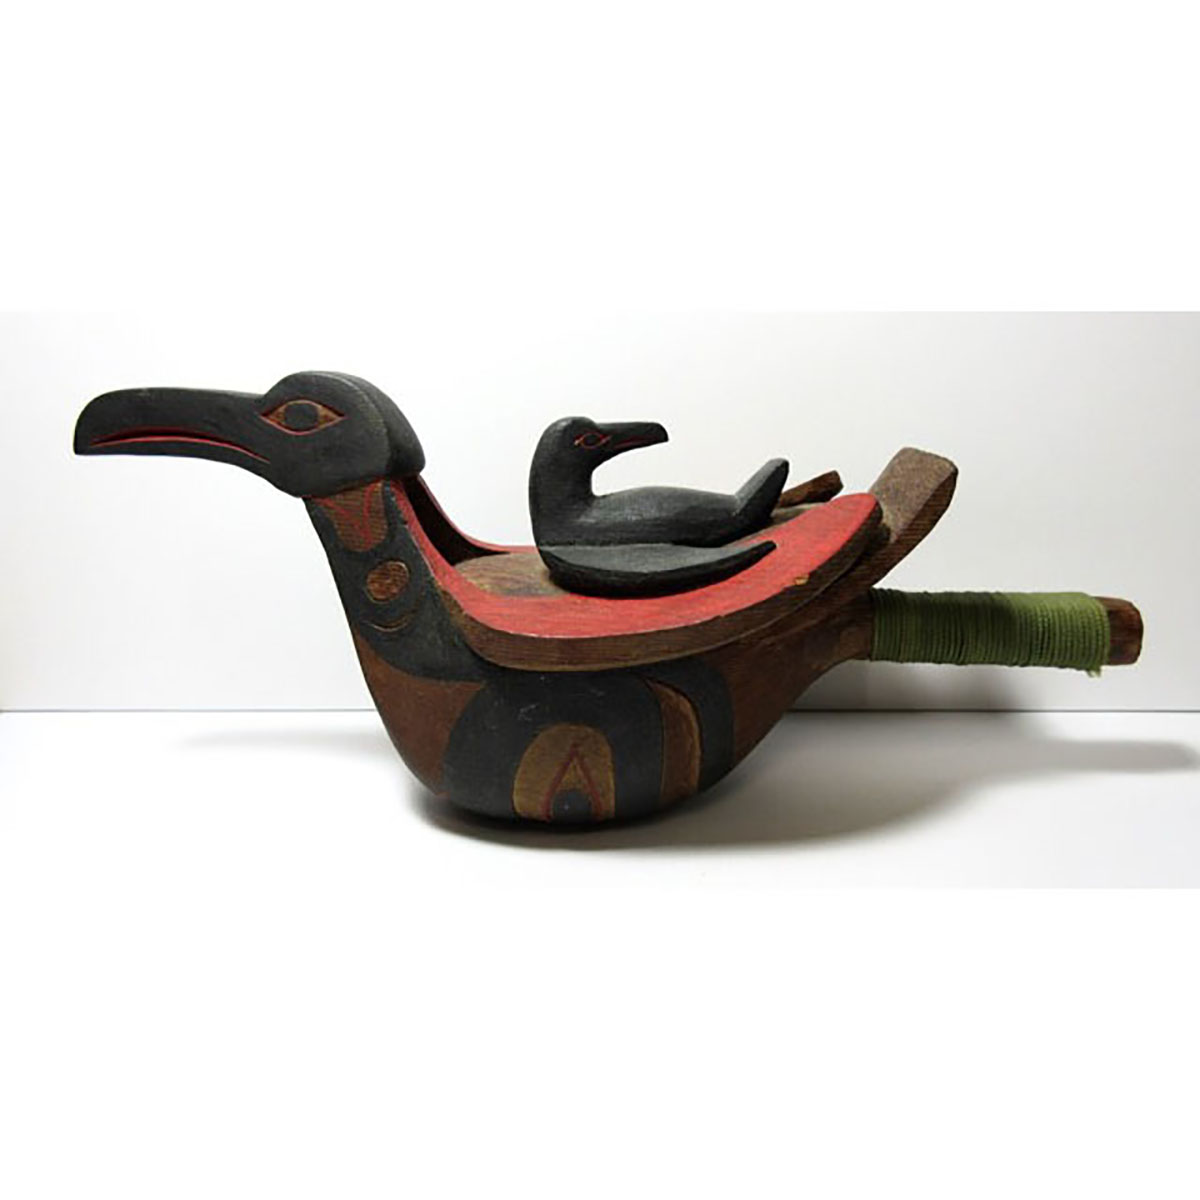 UNSIGNED (INDIGENOUS, 20TH CENTURY)  